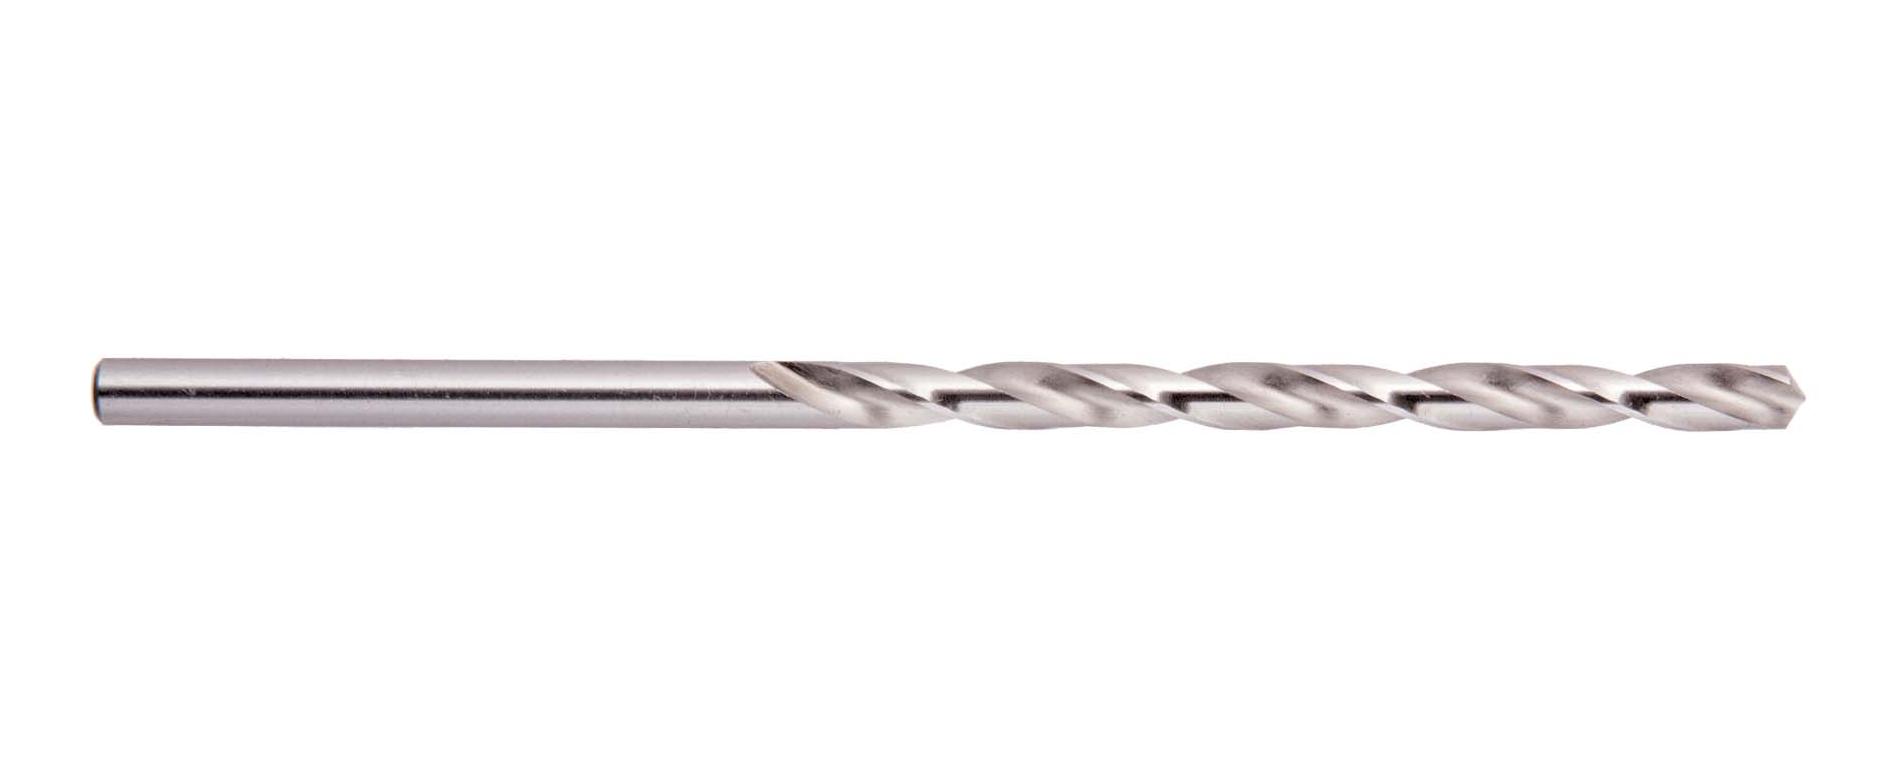 Finish Round Shank with Square End Taper Chamfer Drillco 2800 Series High-Speed Steel Hand Threading Tap Bright Uncoated M22 x 1.5 Size